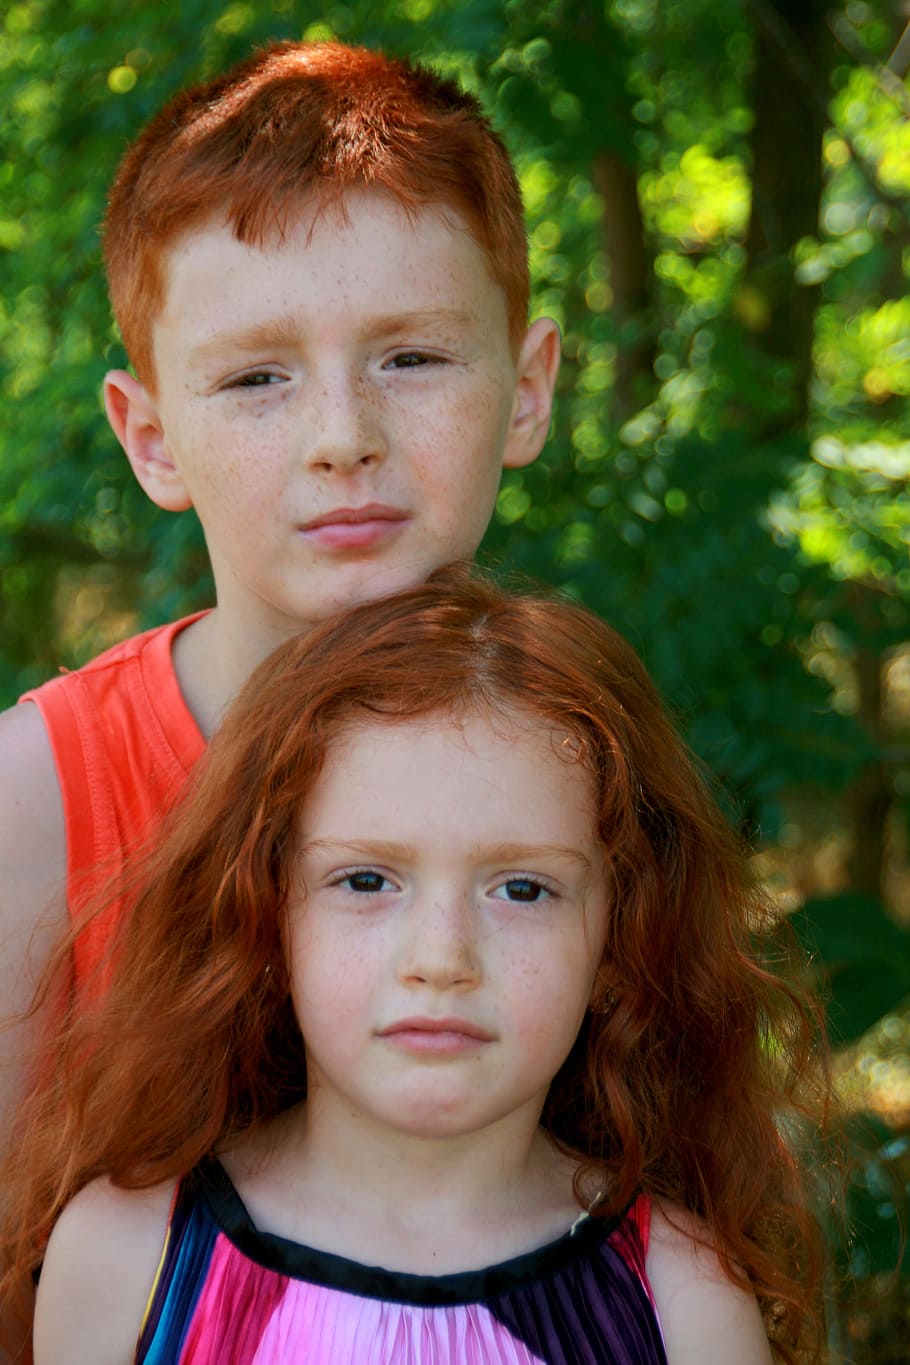 brother, sister, portrait, russet, redhead, childhood, child, front view, real people, women